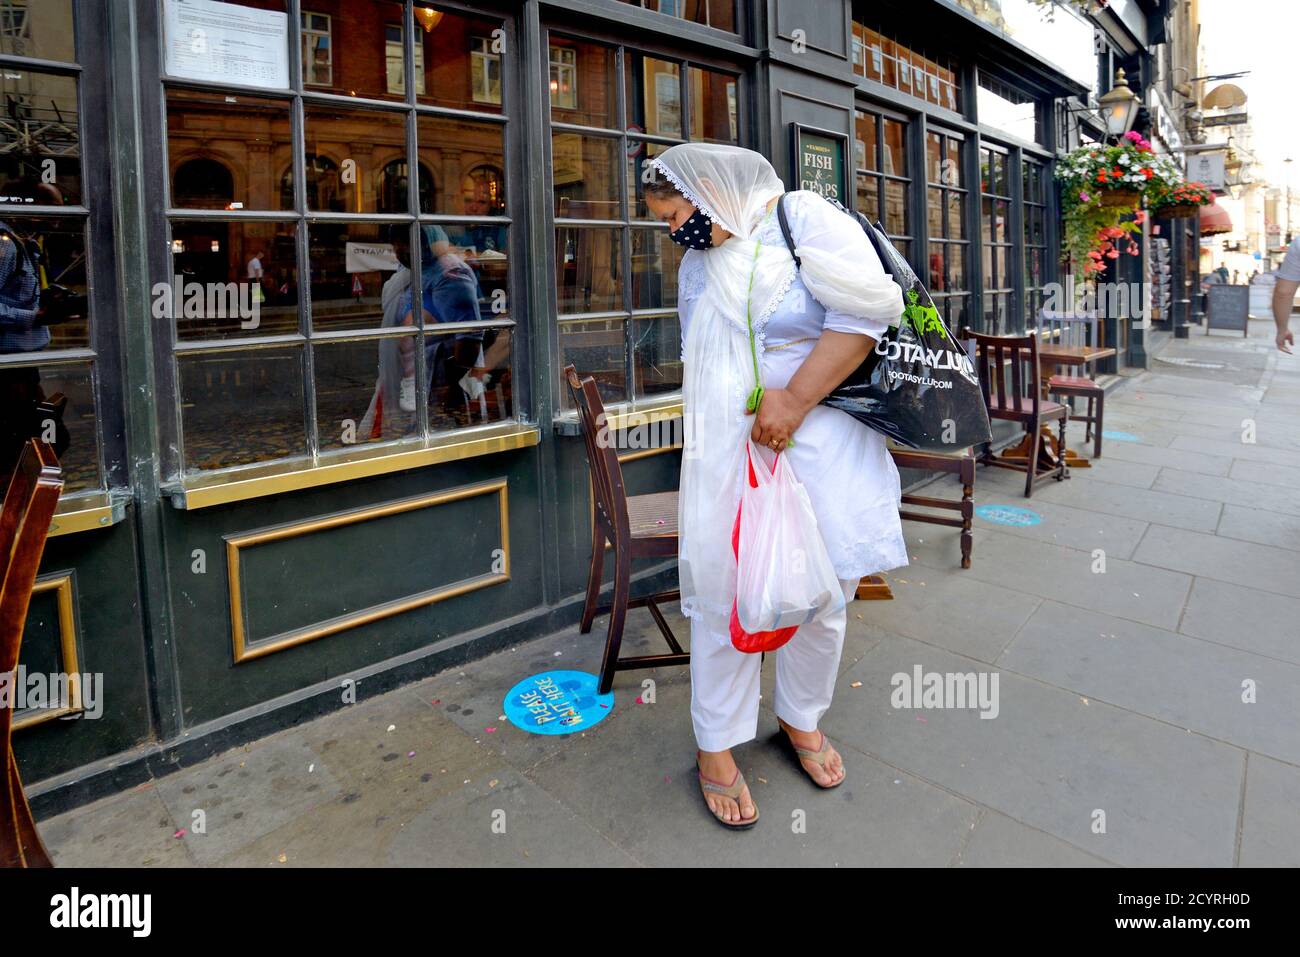 London, England, UK. Asian woman in Whitehall, wearing a facemask and looking at a 'Please Wait Here' sticker on the pavement, during the COVID pandem Stock Photo